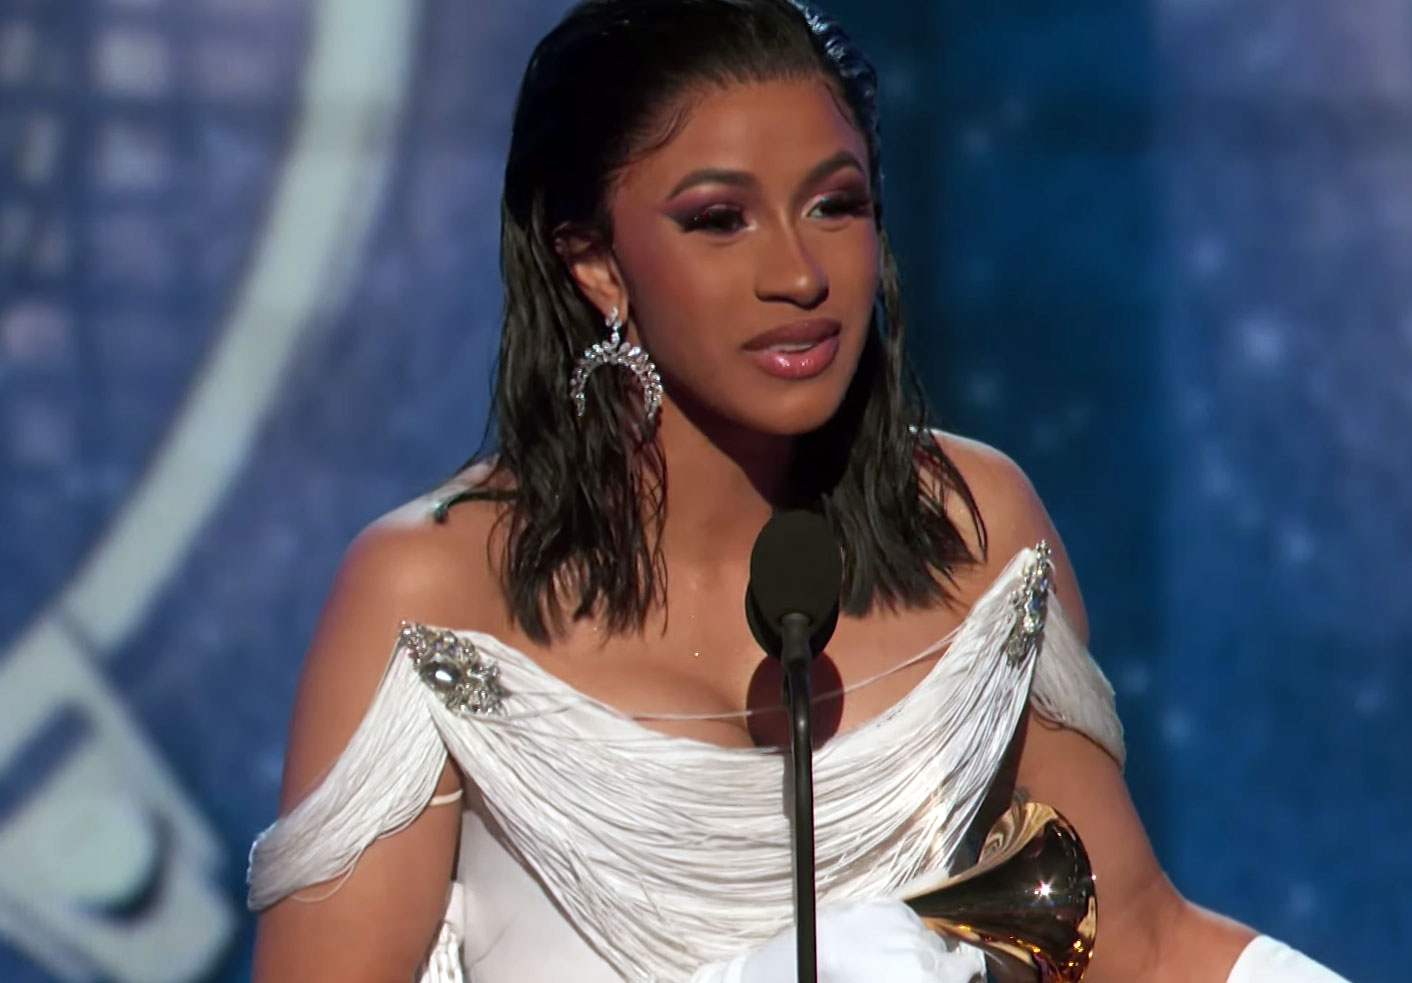 Cardi B accepts her award at the 2019 Grammys